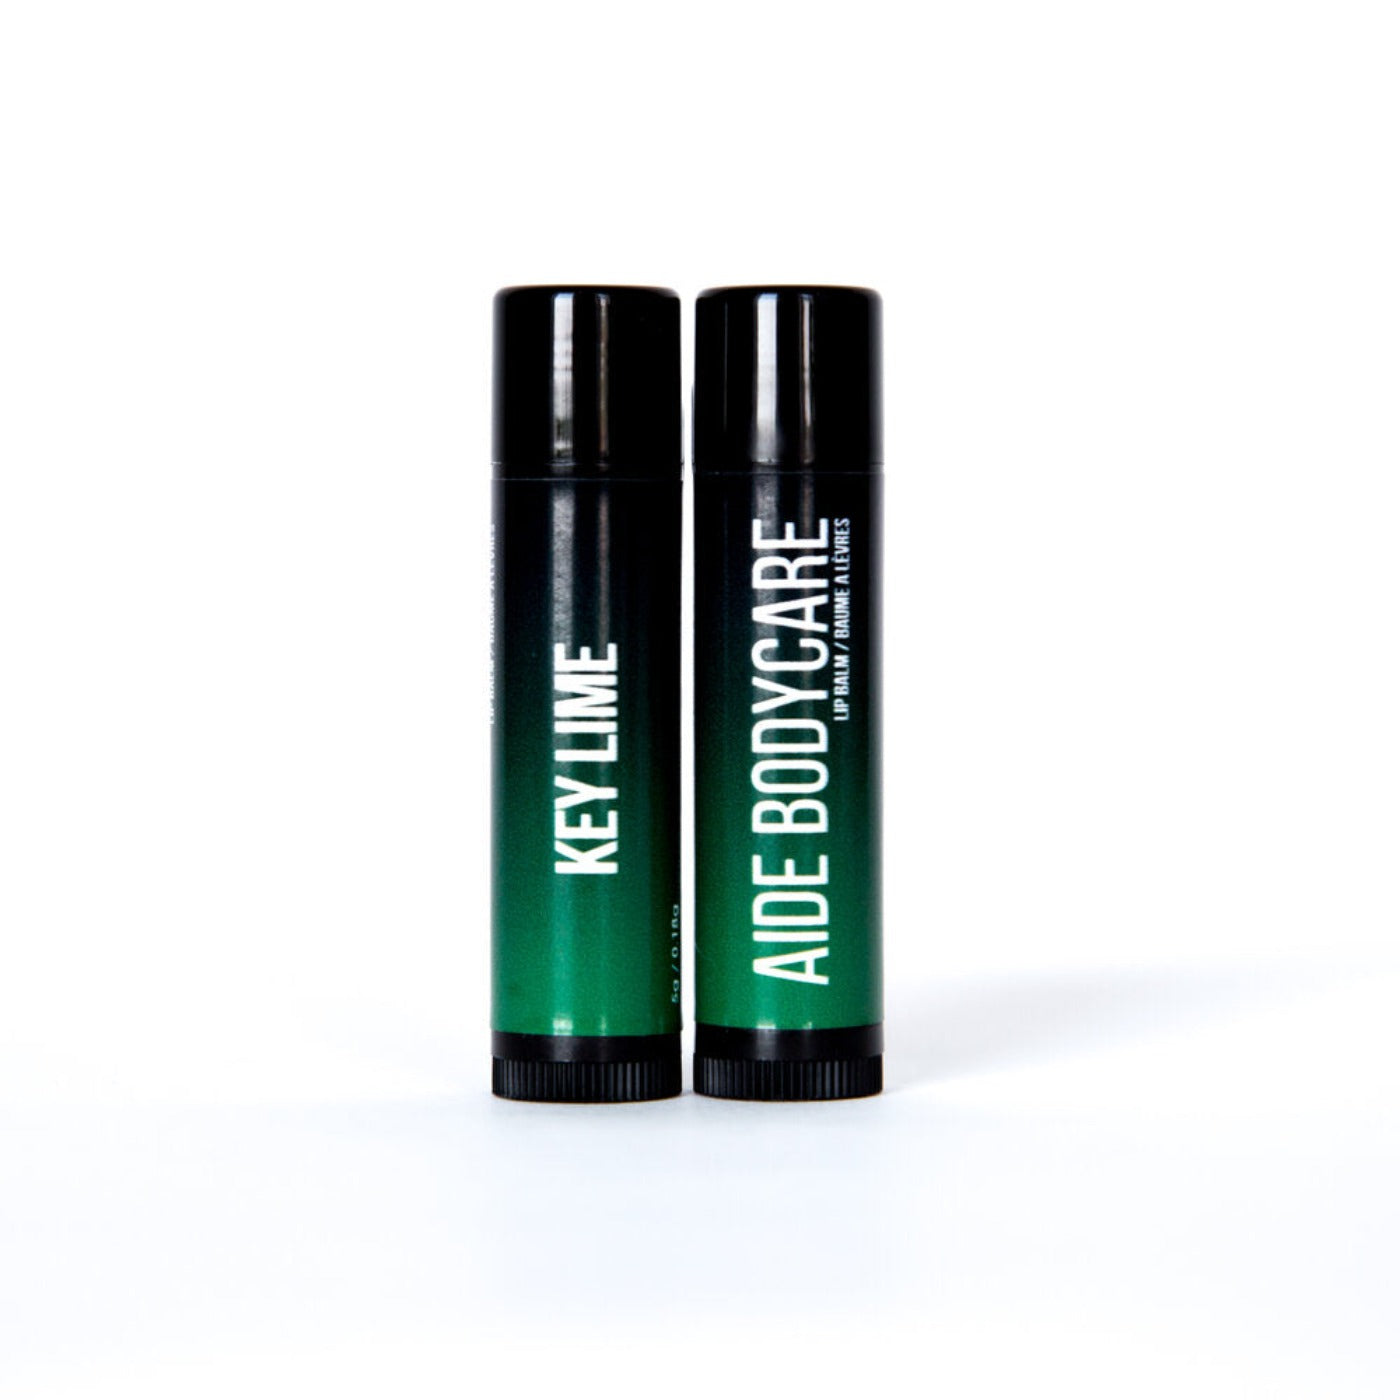 side by side lip balm containers that have a black to green gradient, and text that reads "key lime" on one, and "Aide bodycare" on the other